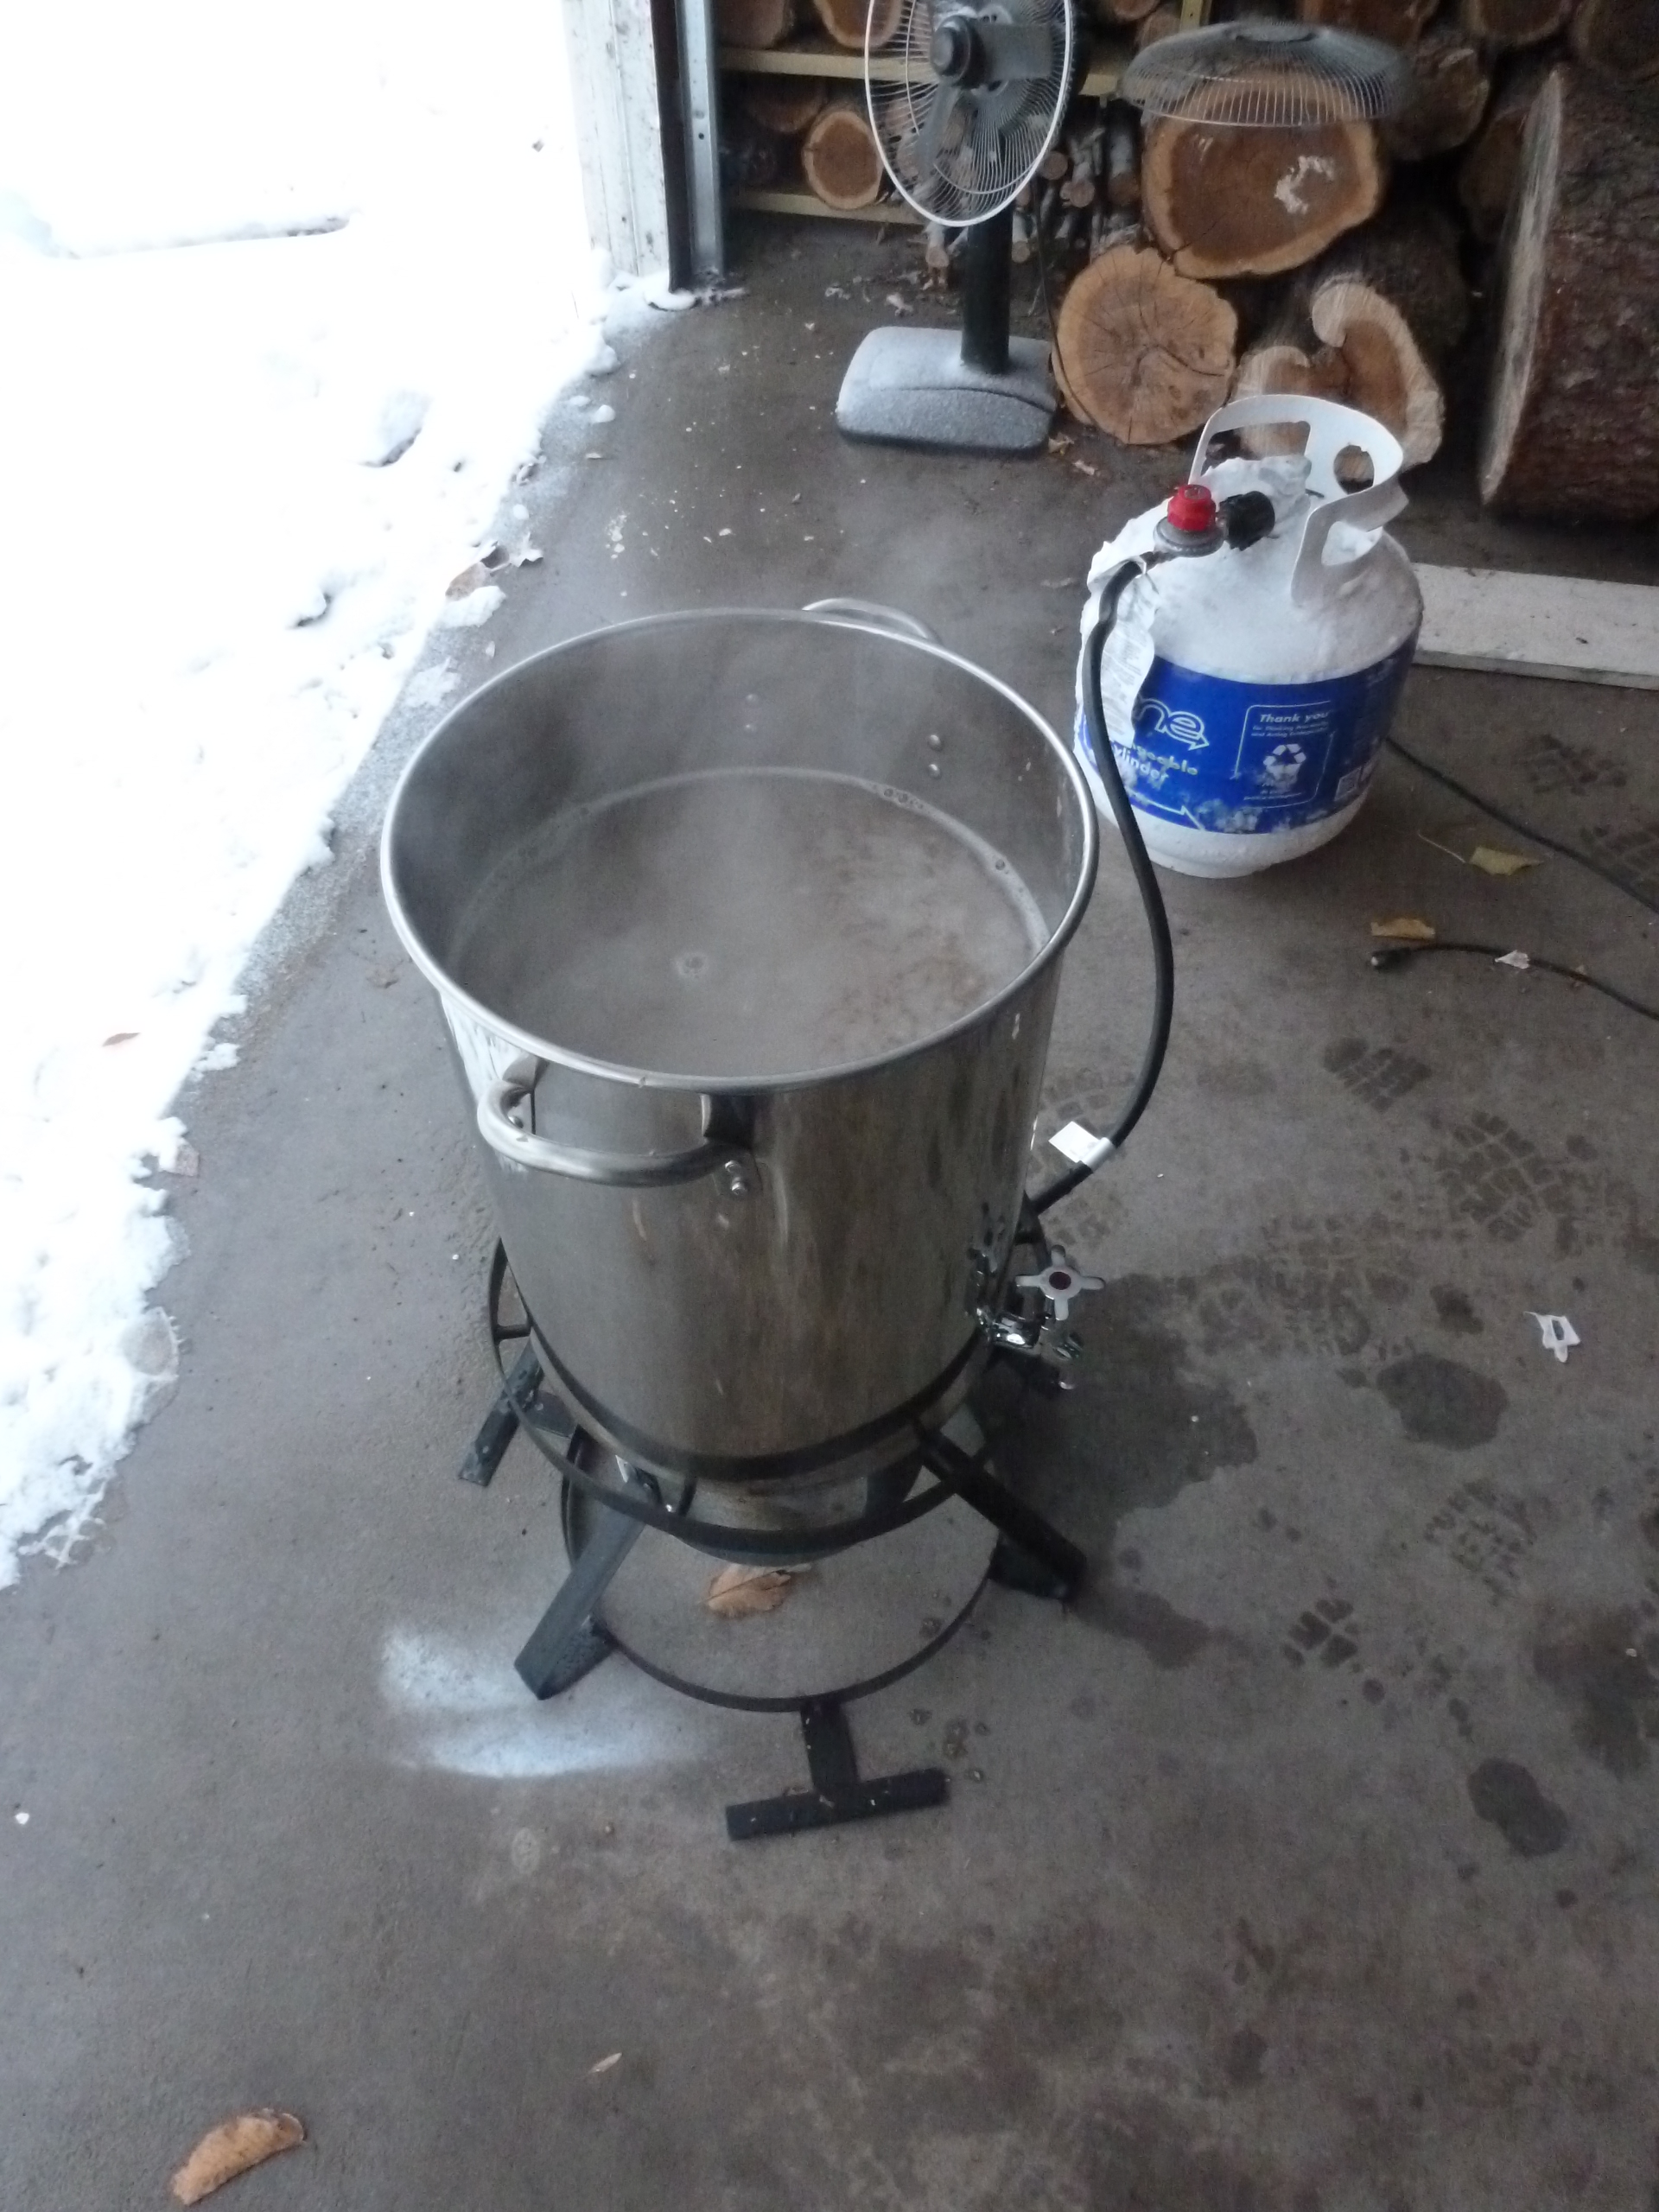 Bringing the wort to a vigorous boil